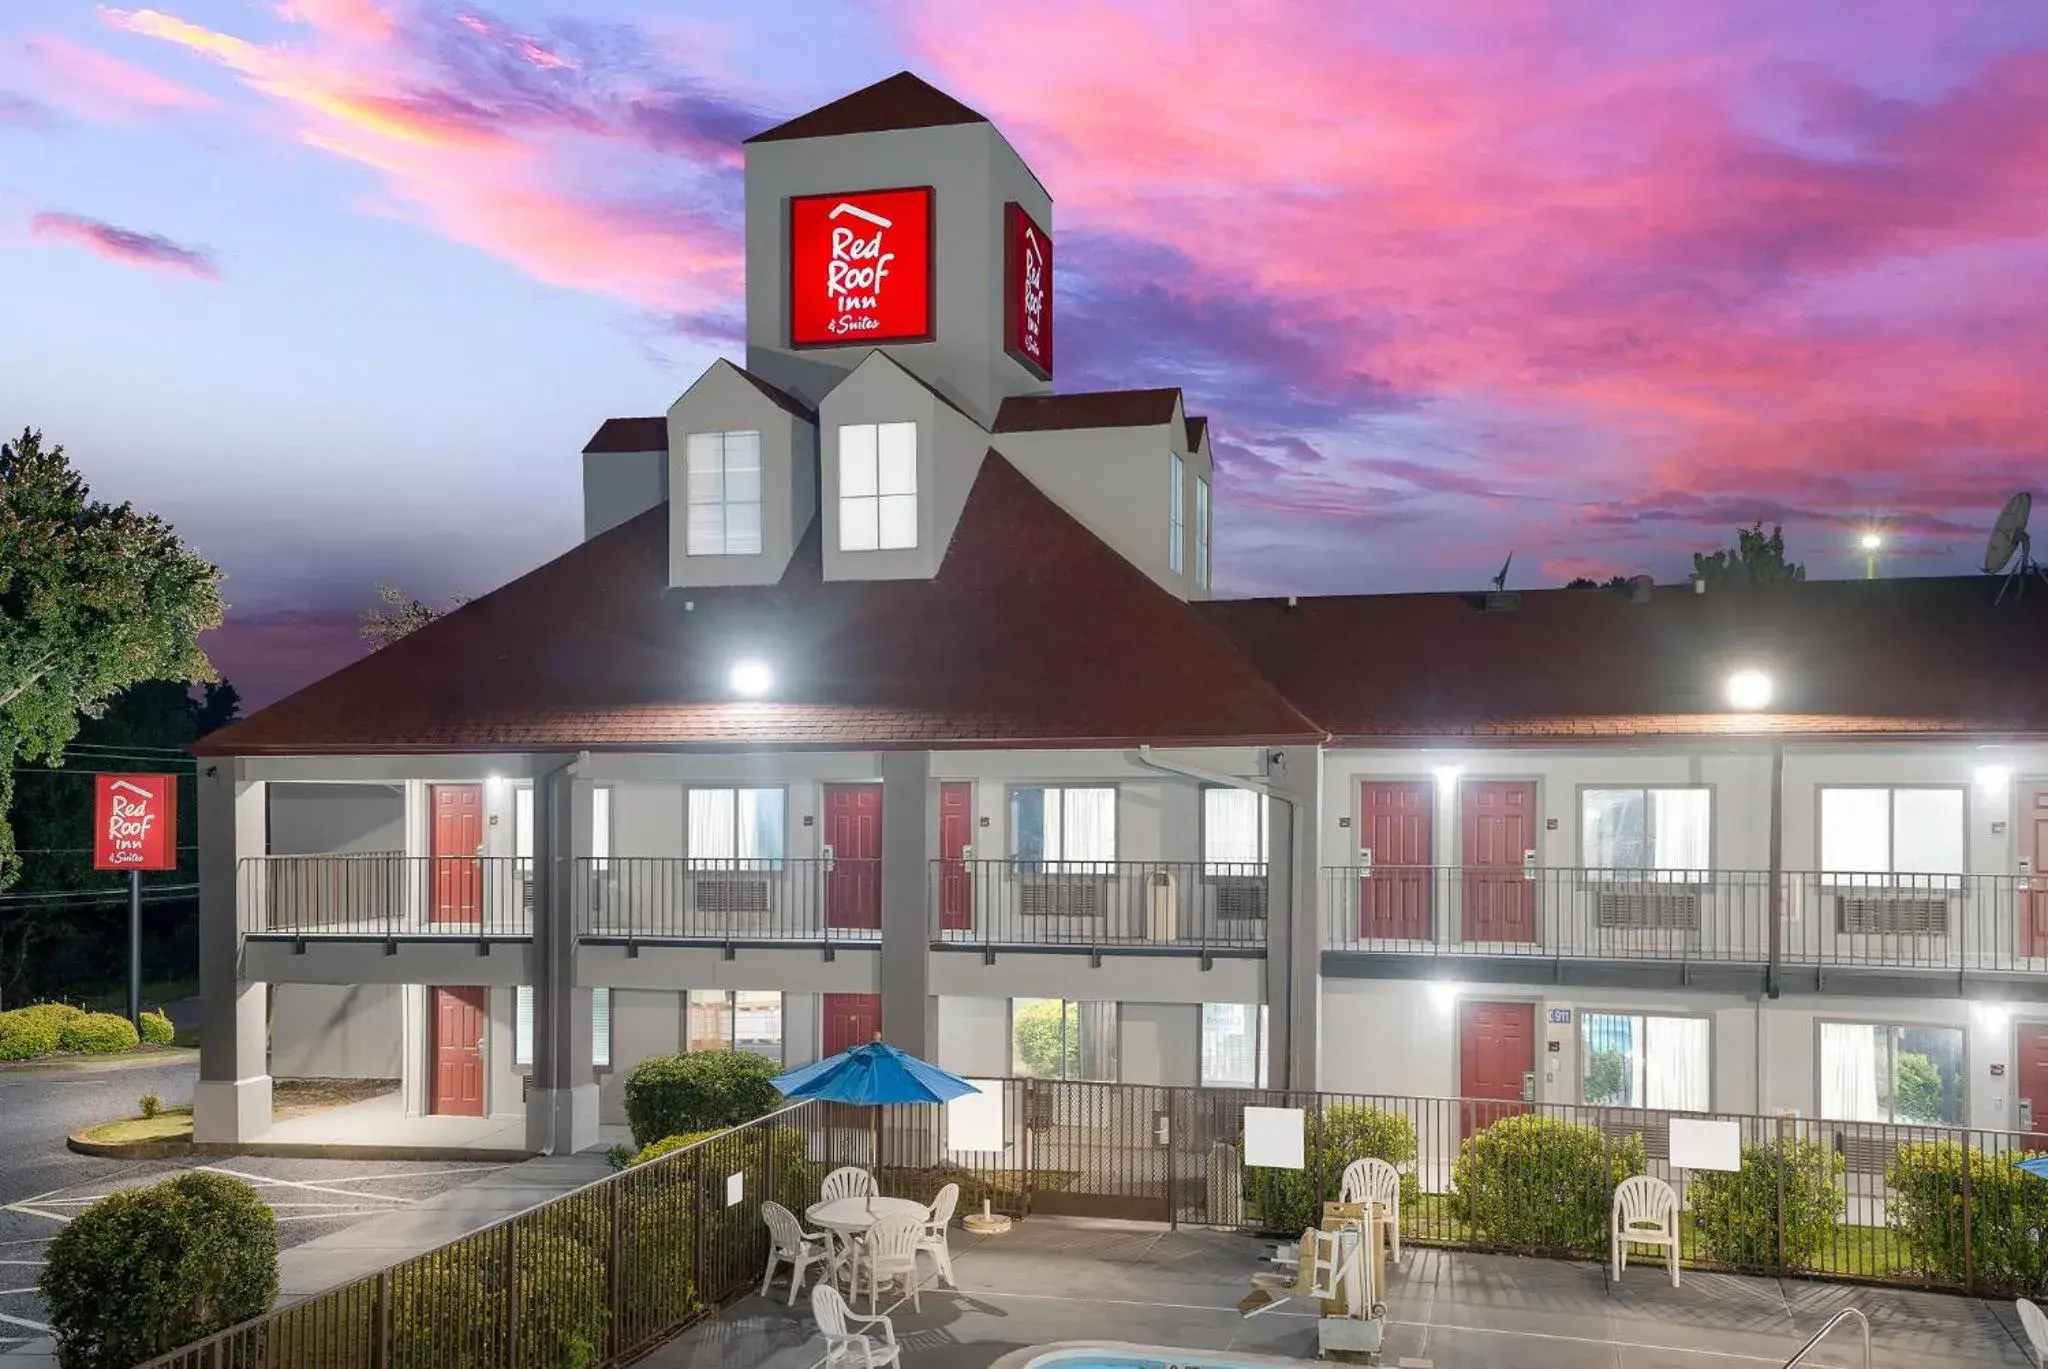 Property Building in Red Roof Inn Spartanburg - I-85